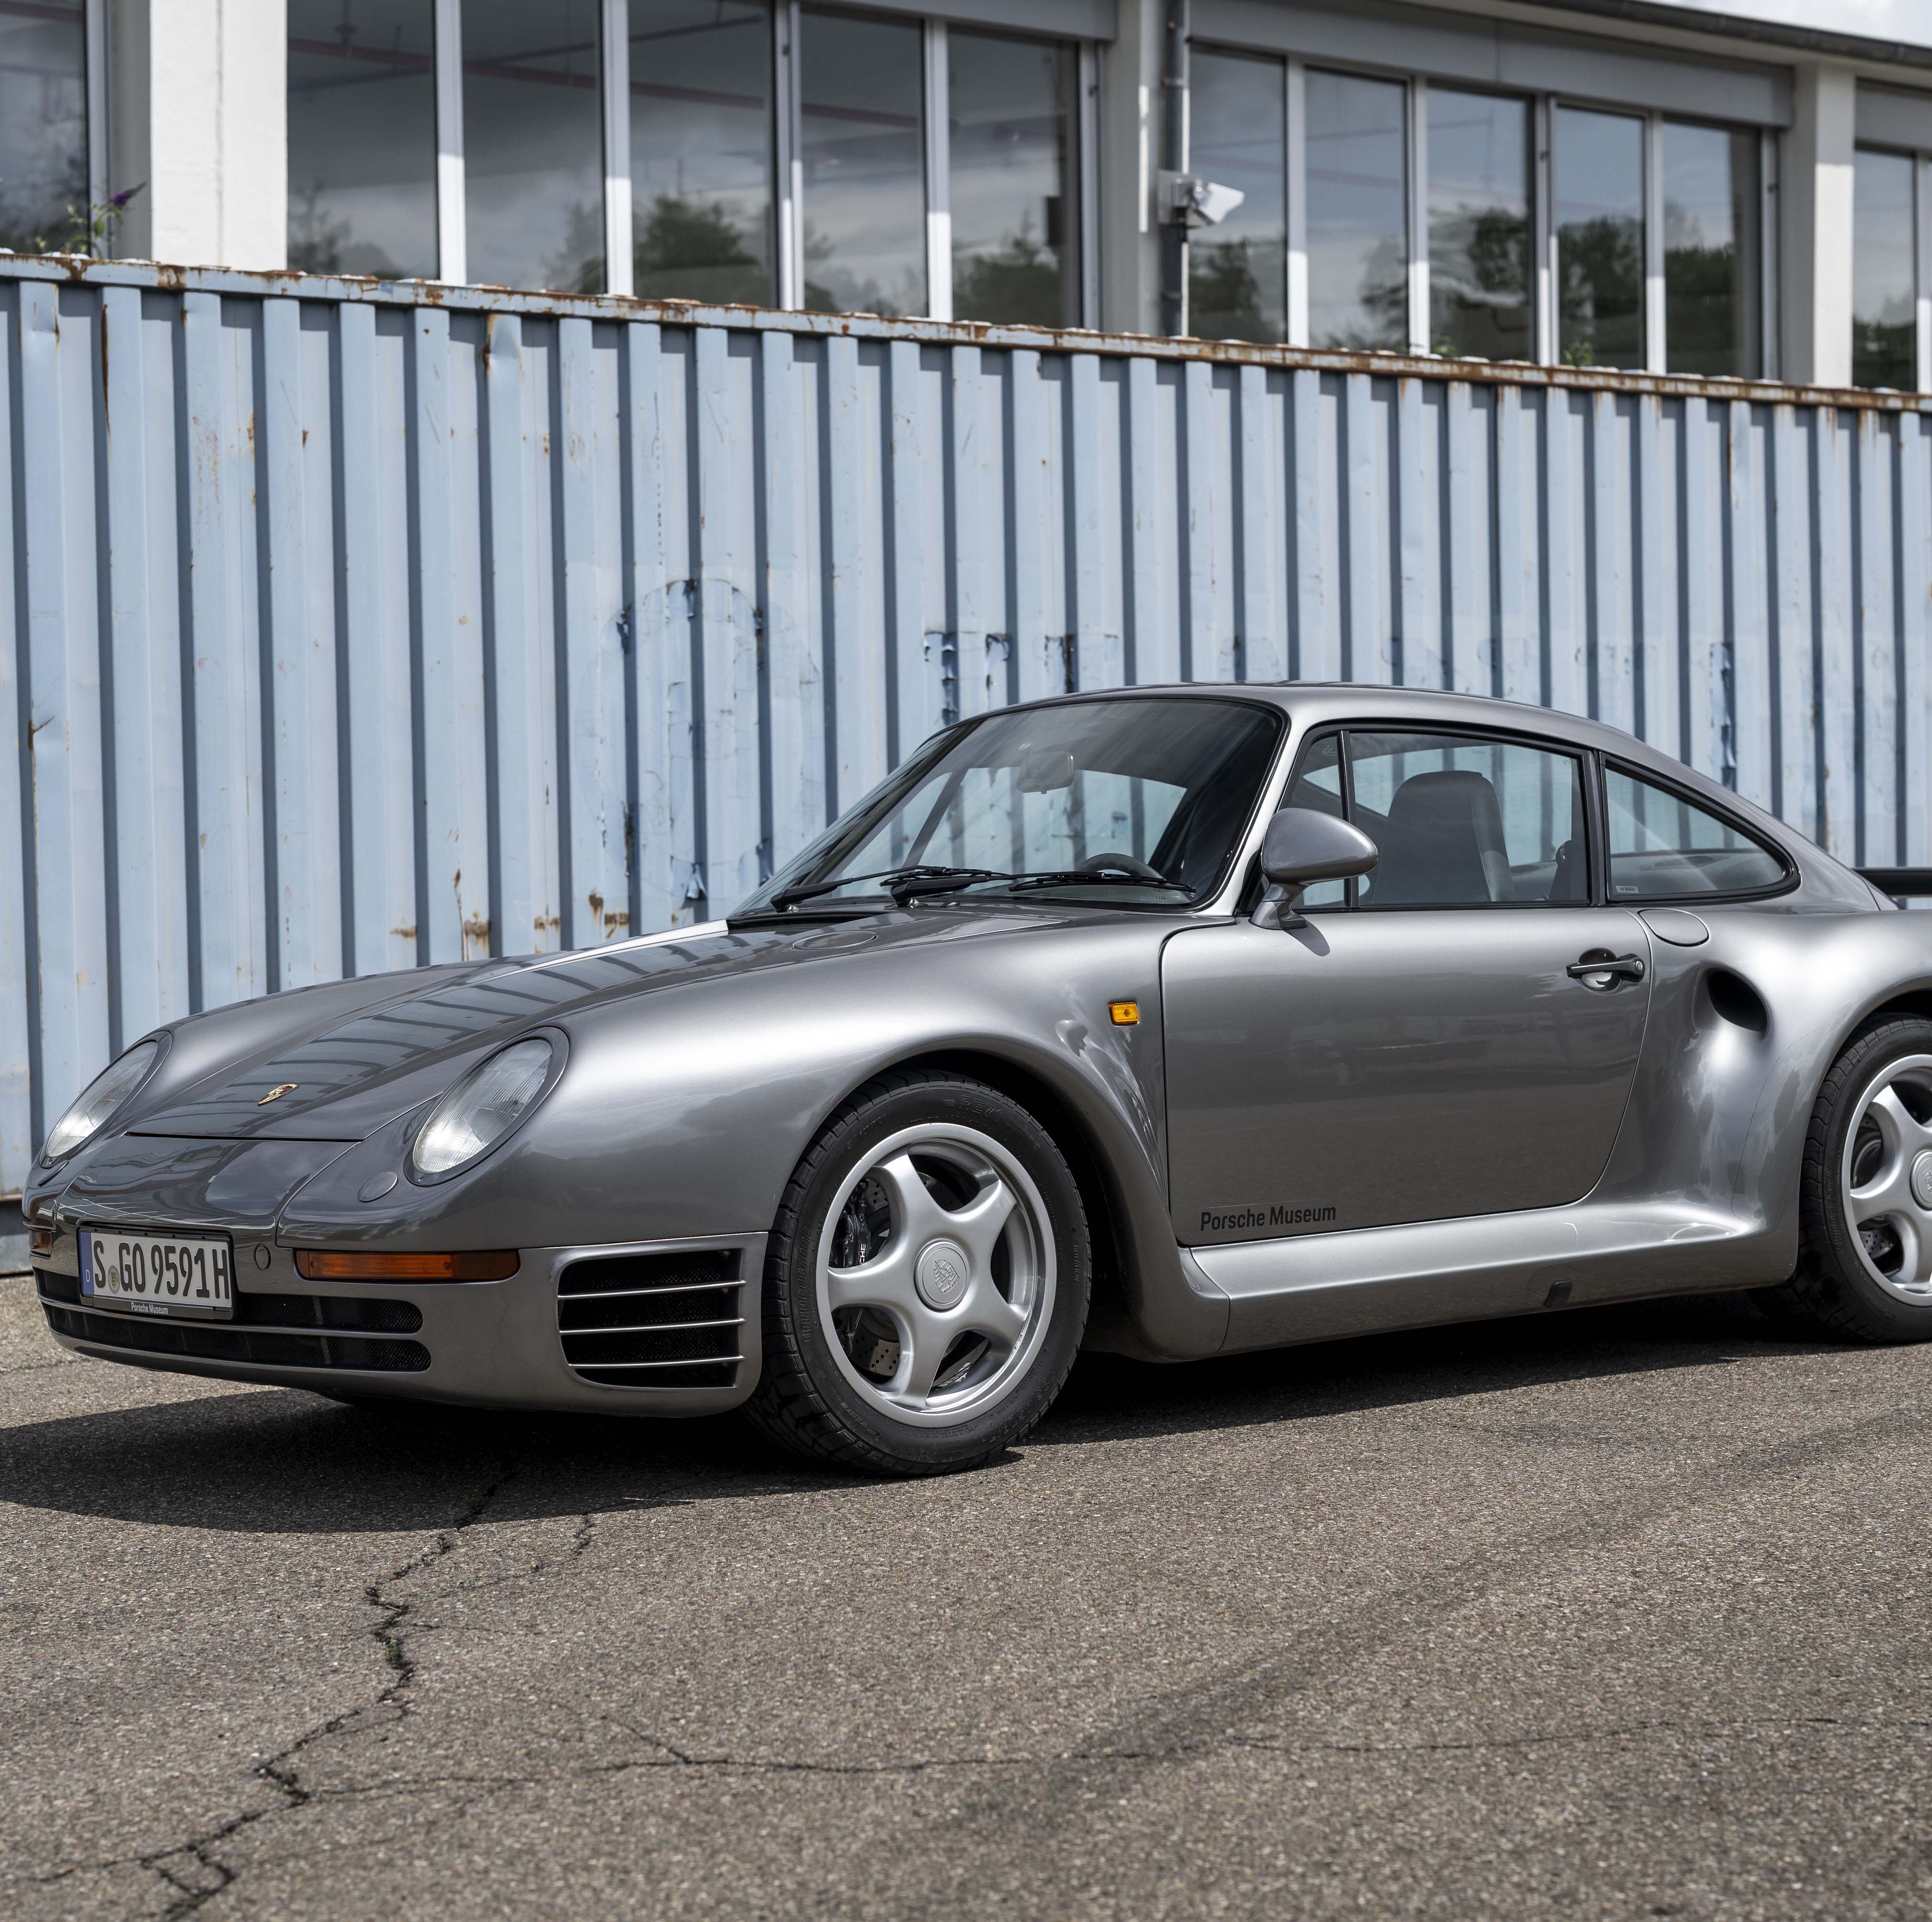 The Porsche 959 Is Not the Car You Think It Is